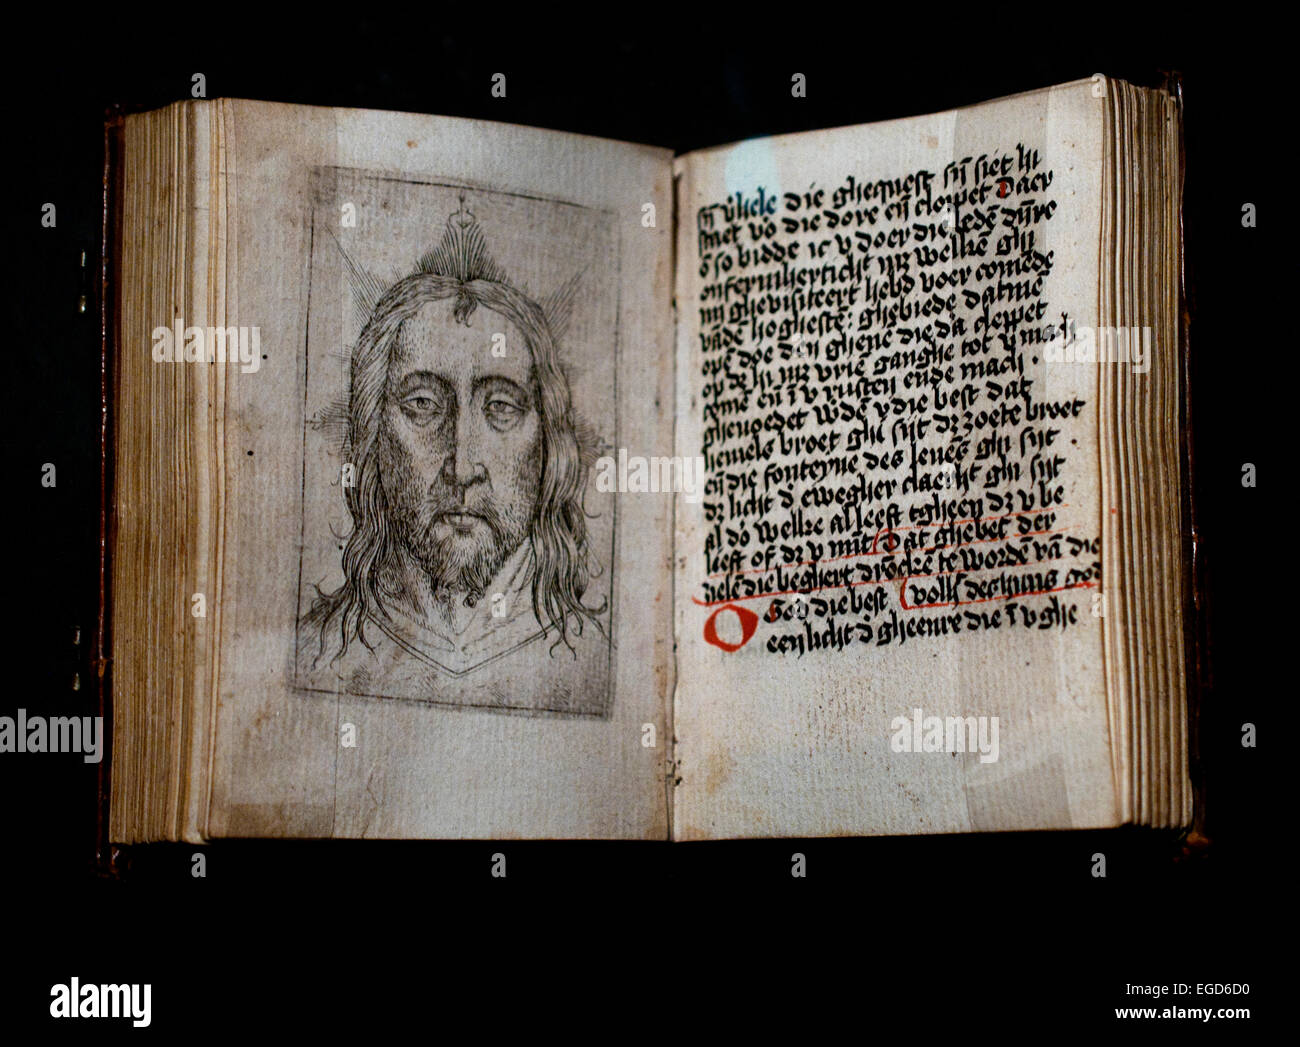 Face of Christ ( Little Bible -Book )  by Saint Augustine 1500  ( intended for dutch novices Augustinian Cloister )  Netherlands ( resembles version of Memling, Bouts, van der Weyden ? ) Stock Photo